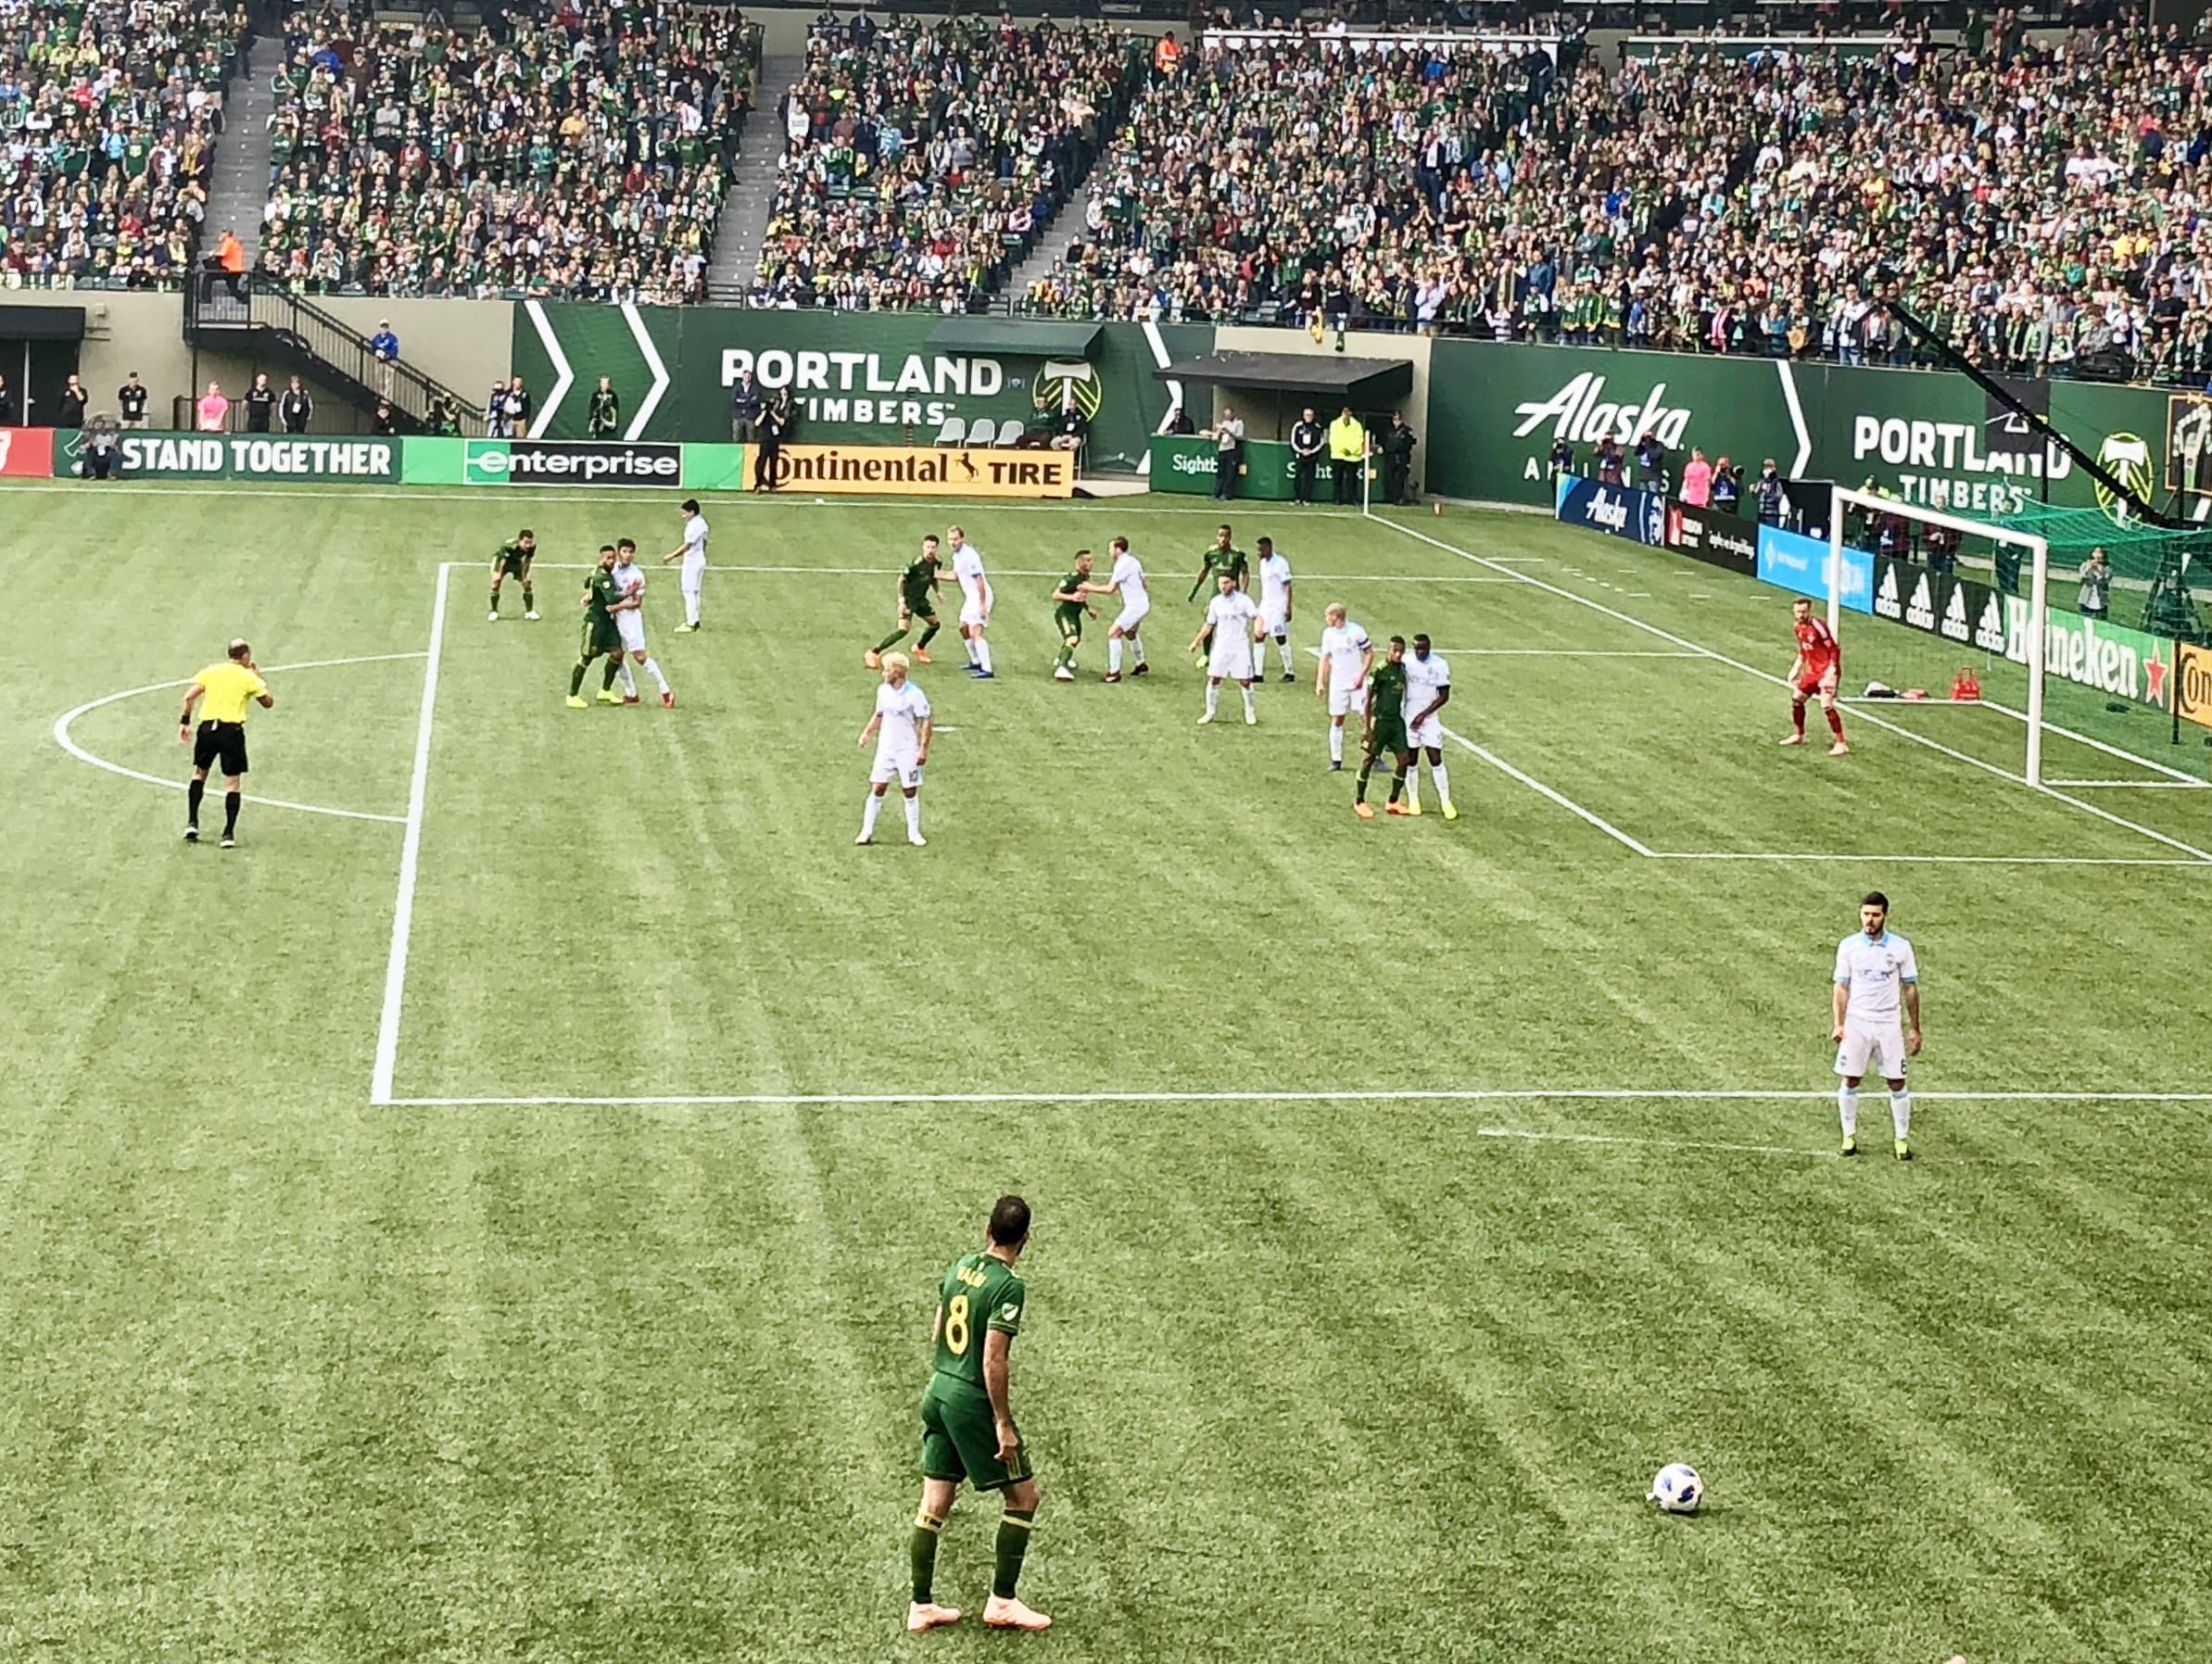 Portland Timbers' Diego Valeri (8) lines up a kick against the Seattle Sounders during the first leg of the Major League Soccer playoff series on Sunday, Nov. 4, 2018, at Providence Park. Portland won 2-1.